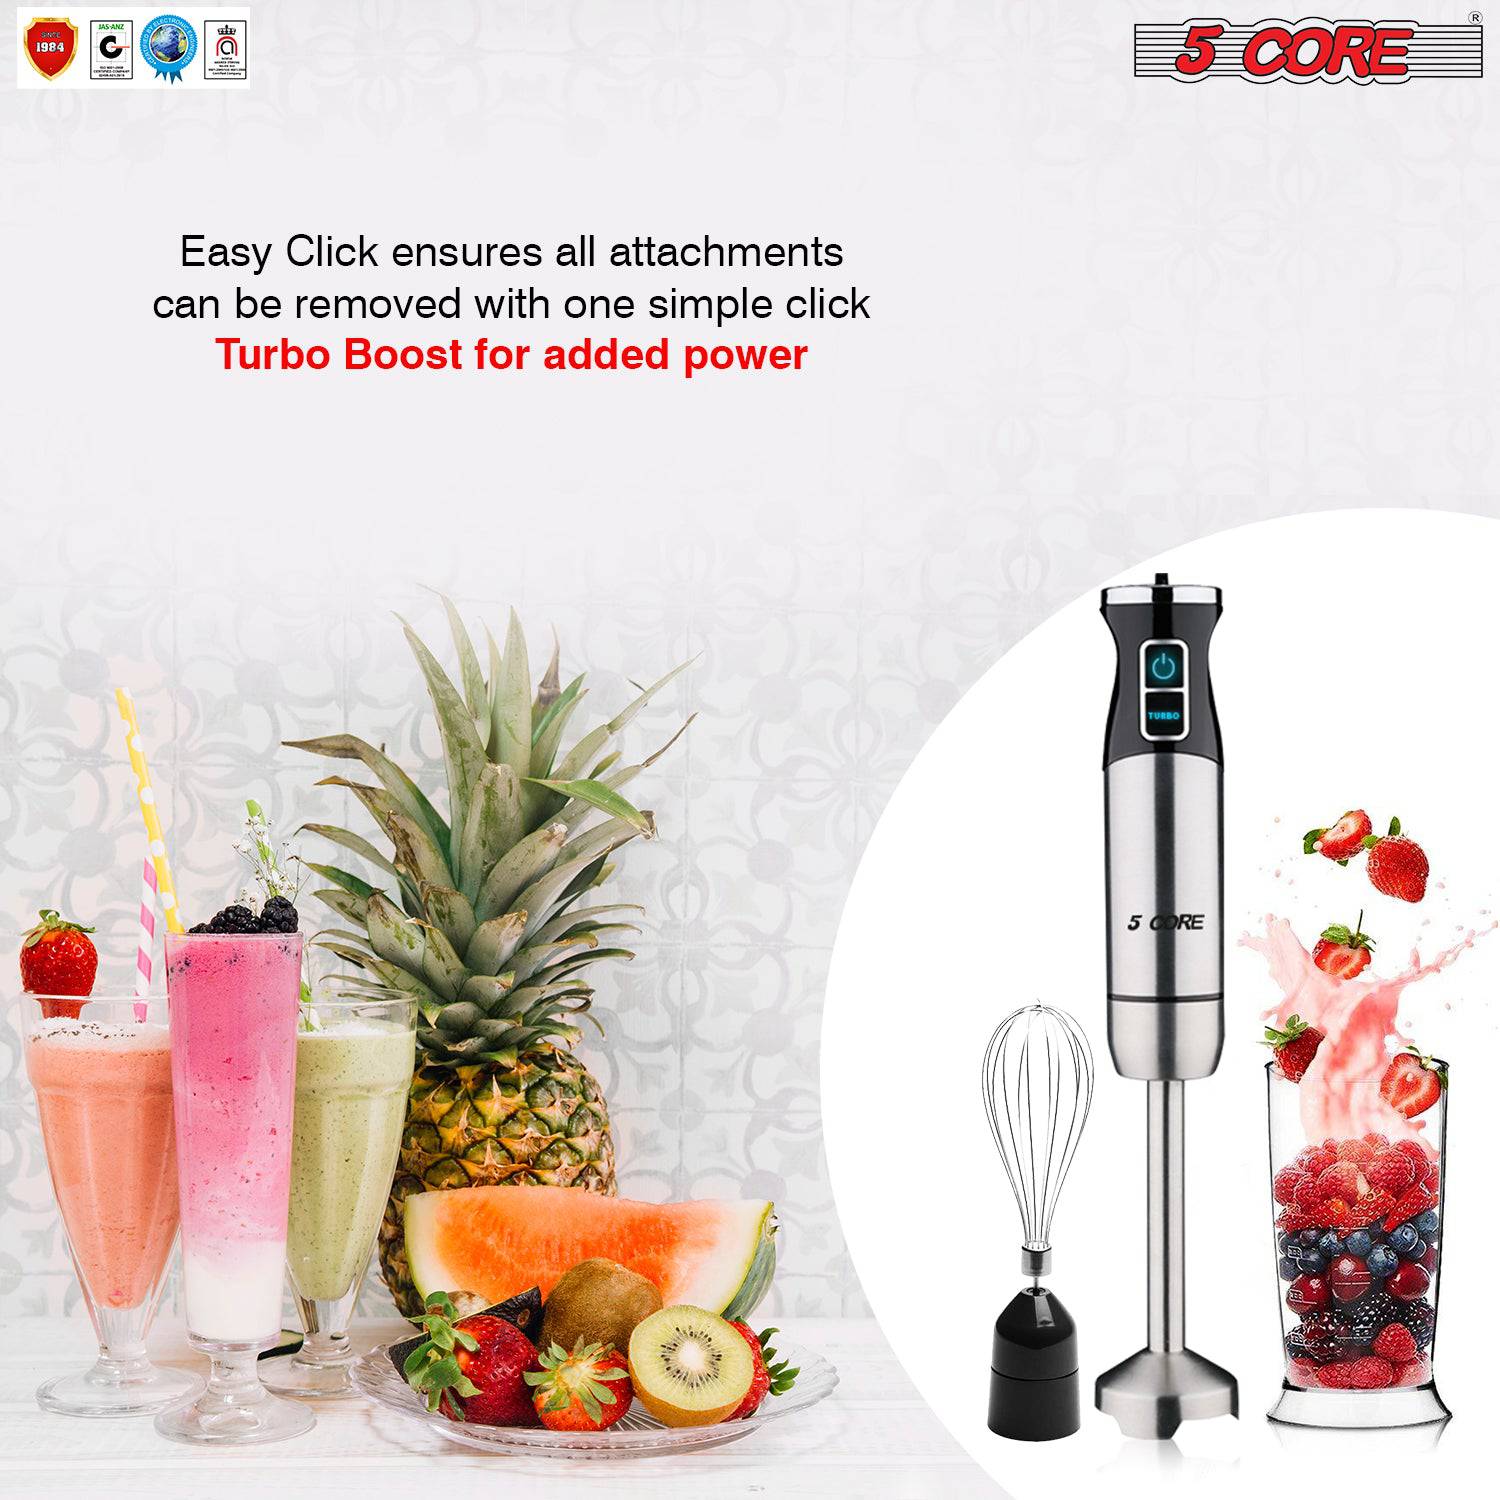 https://res.cloudinary.com/aeropost-inc/image/upload/IMX45W/5-core-kitchen-appliances-hand-blender-500w-multifunctional-electric-immersion-blender-8-variable-speed-5core-hb-1520-37457636884717__1237931489.jpg